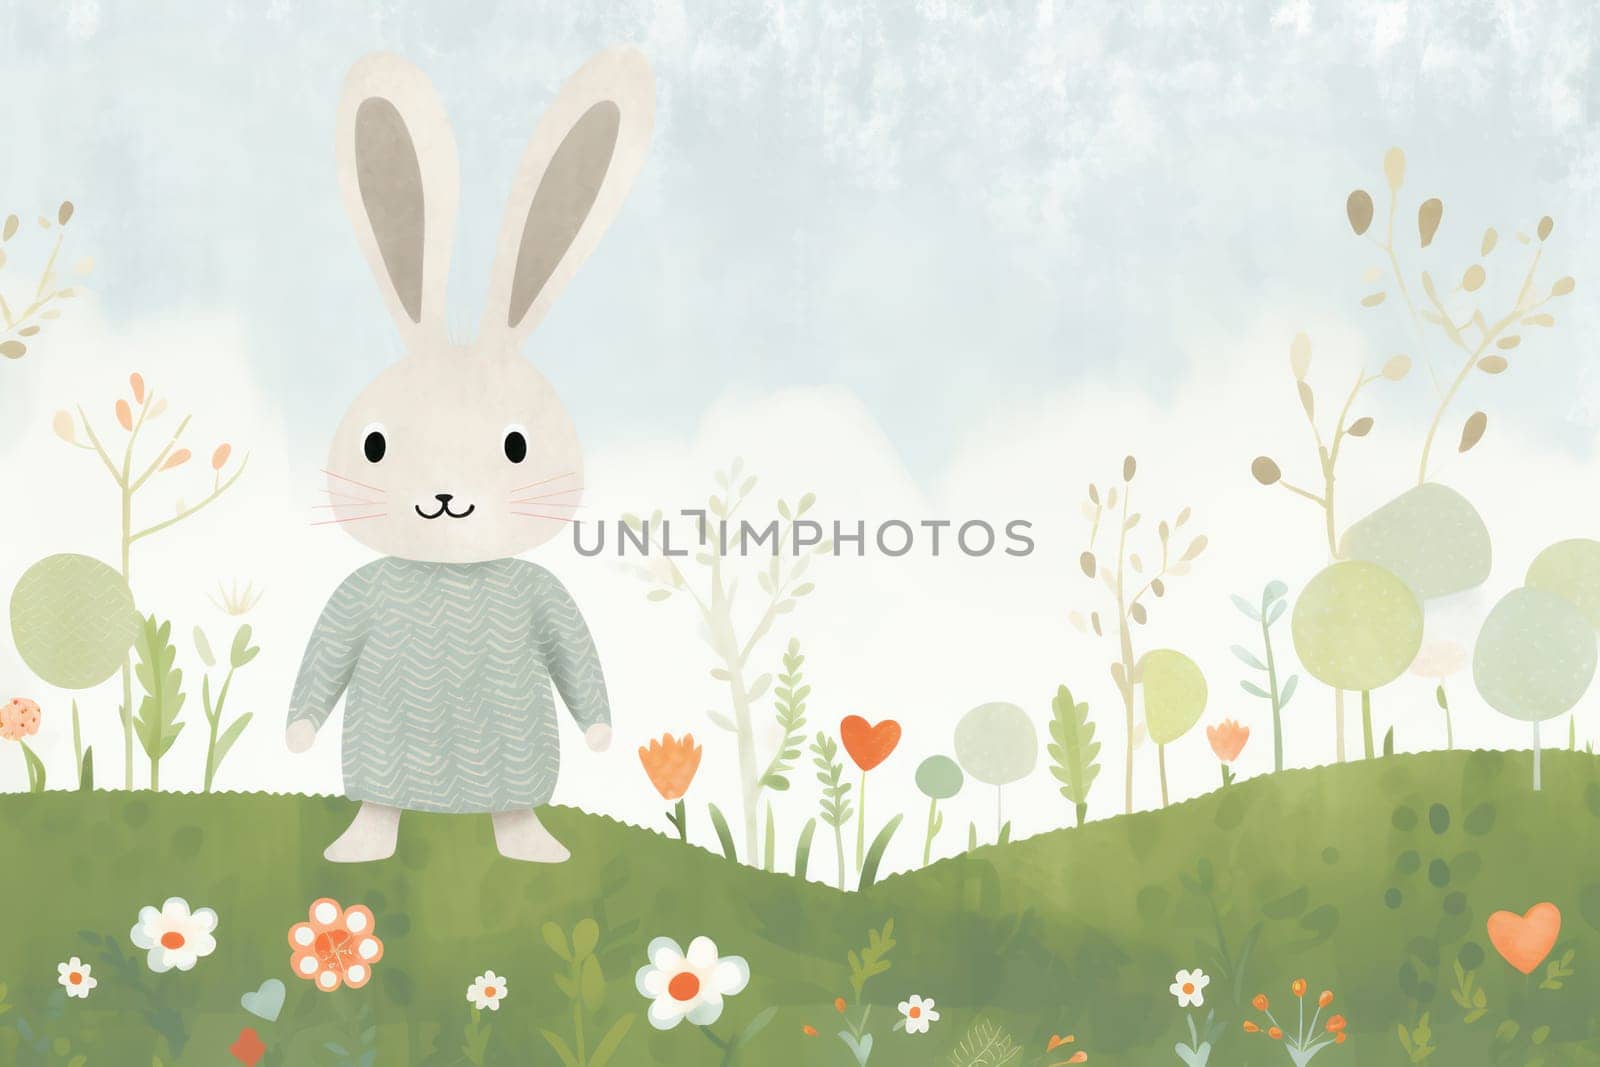 Cute Bunny Cartoon Illustration on Lovely Easter Card - A Funny Bunny with Pink Ears Surrounded by Beautiful Flower Patterns, Standing on Green Grass under Blue Sky. by Vichizh